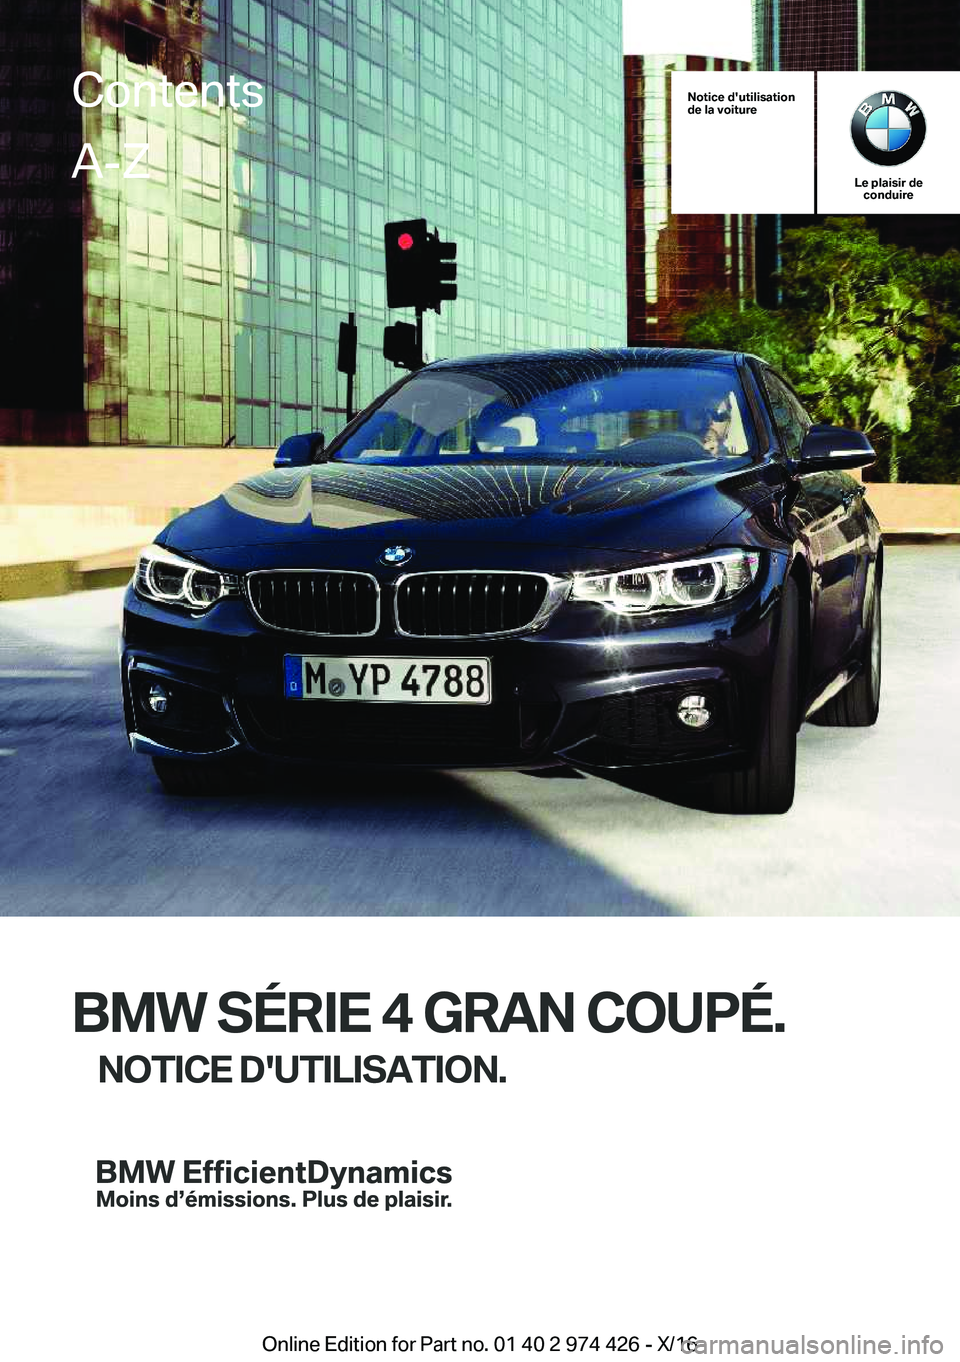 BMW 4 SERIES GRAN COUPE 2017  Notices Demploi (in French) �N�o�t�i�c�e��d�'�u�t�i�l�i�s�a�t�i�o�n
�d�e��l�a��v�o�i�t�u�r�e
�L�e��p�l�a�i�s�i�r��d�e �c�o�n�d�u�i�r�e
�B�M�W��S�